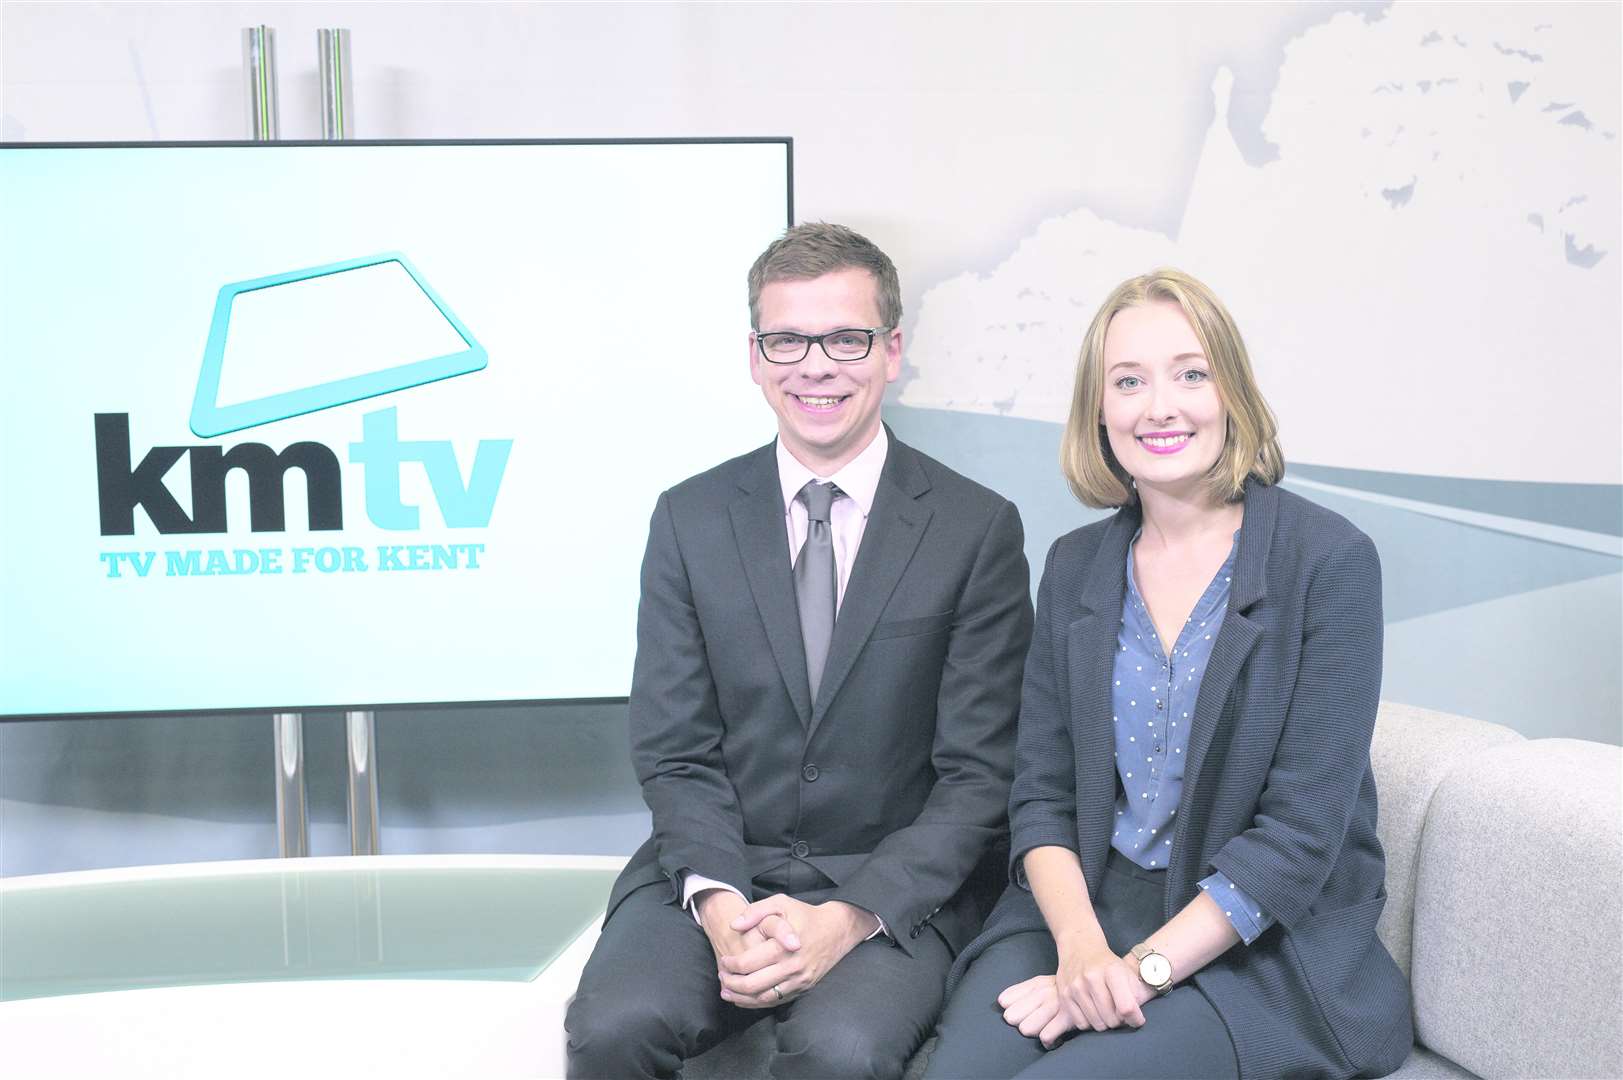 KMTV's Andy Richards and Louisa Britton